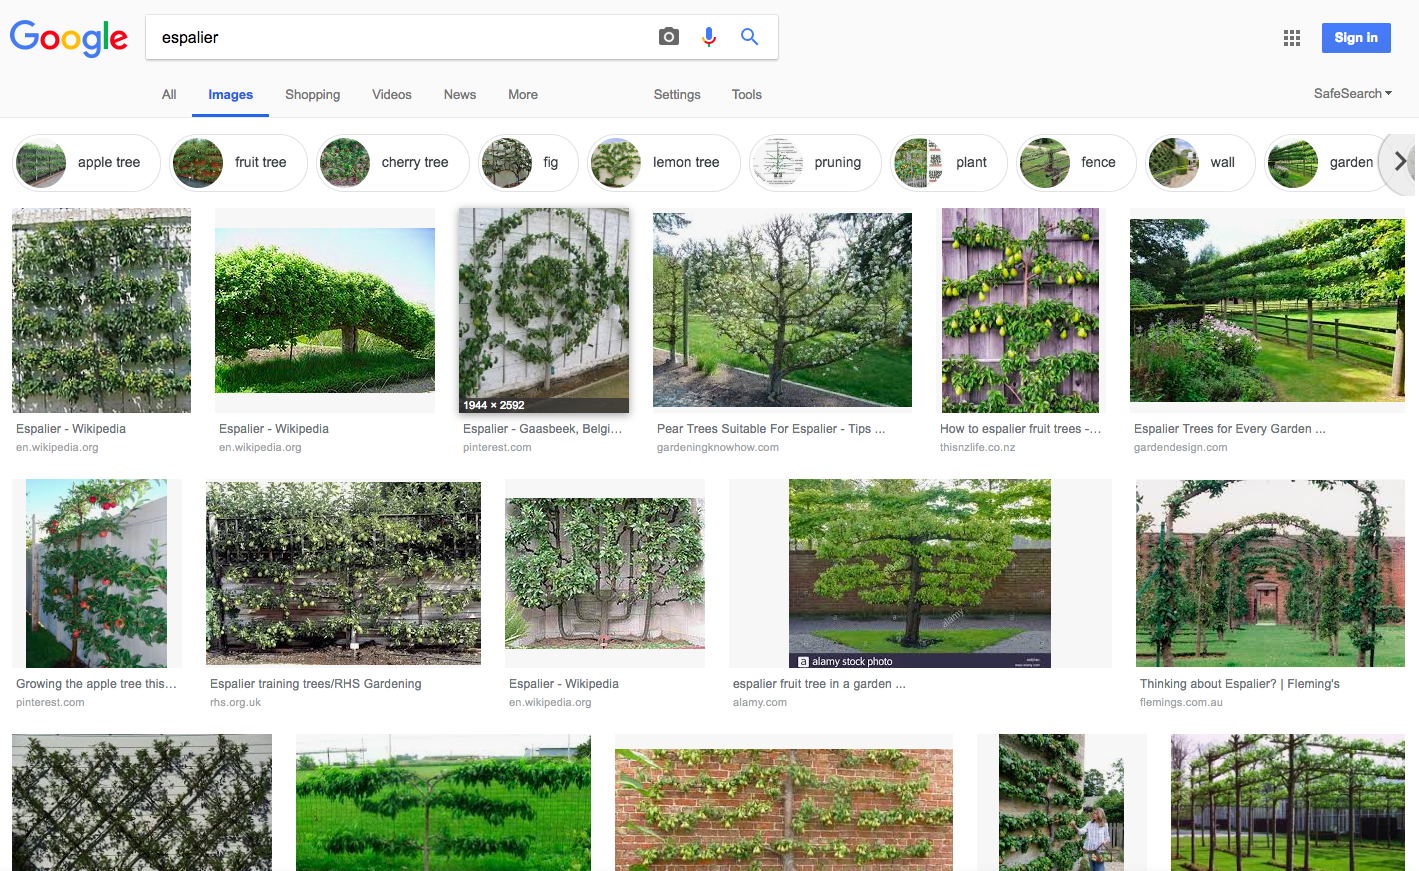 Image search results.